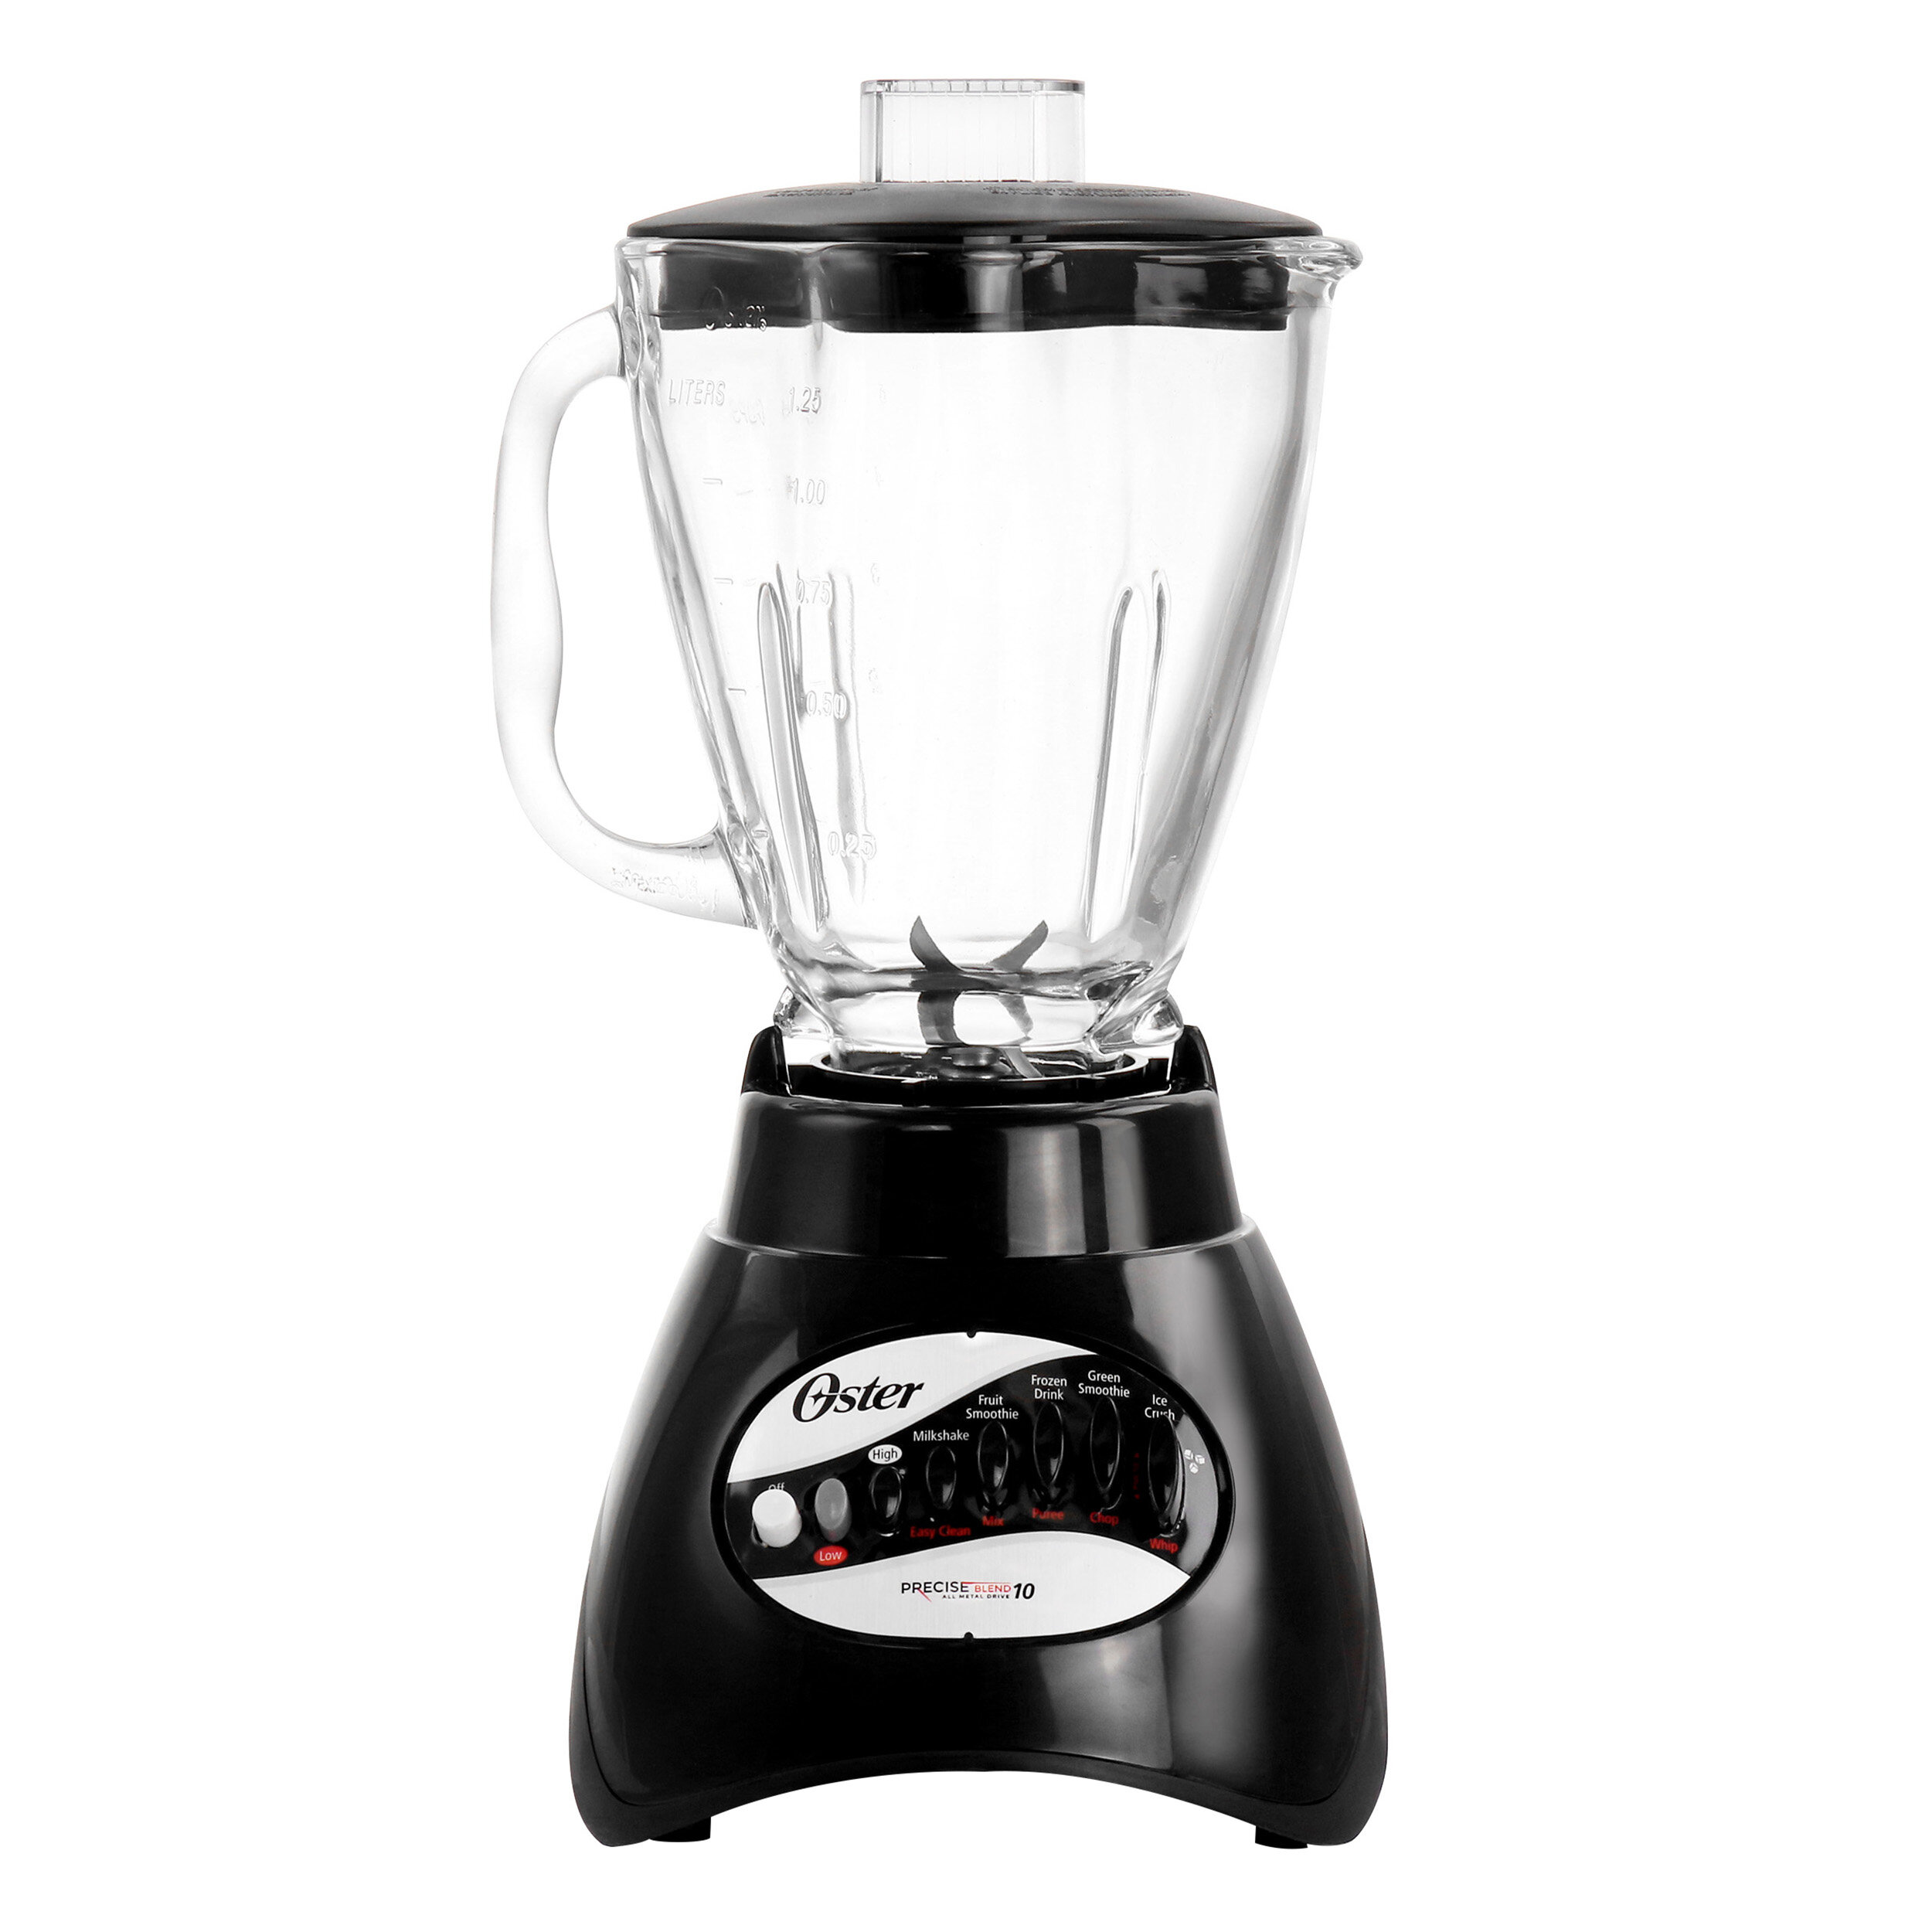 Oster Easy-to-Clean Blender with Dishwasher-Safe Glass Jar with a